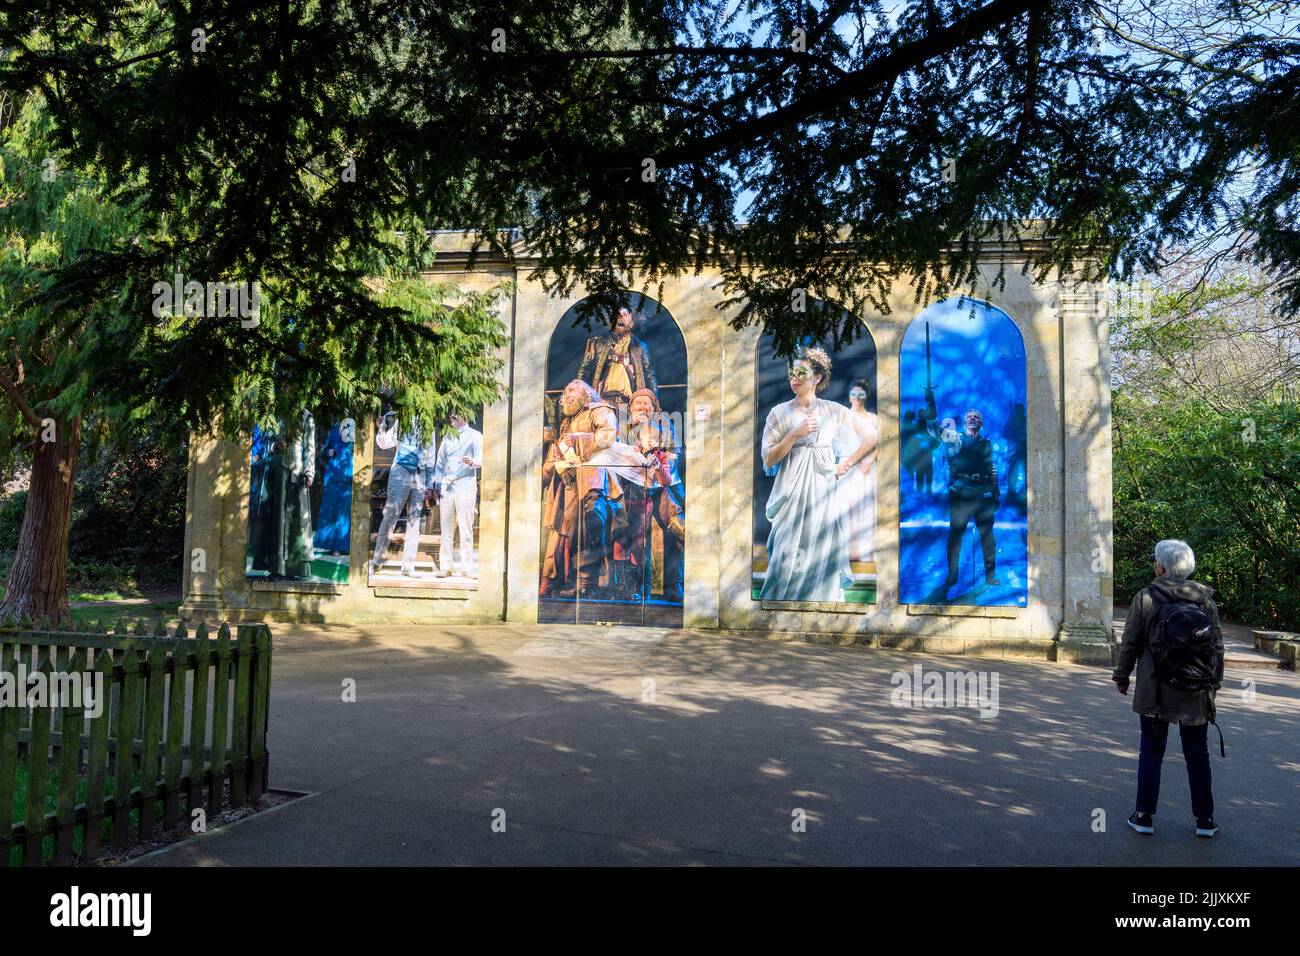 Outdoor Shakespear characters displays in Stratford-upon-Avon, Warwickshire, West Midlends, England. Stock Photo